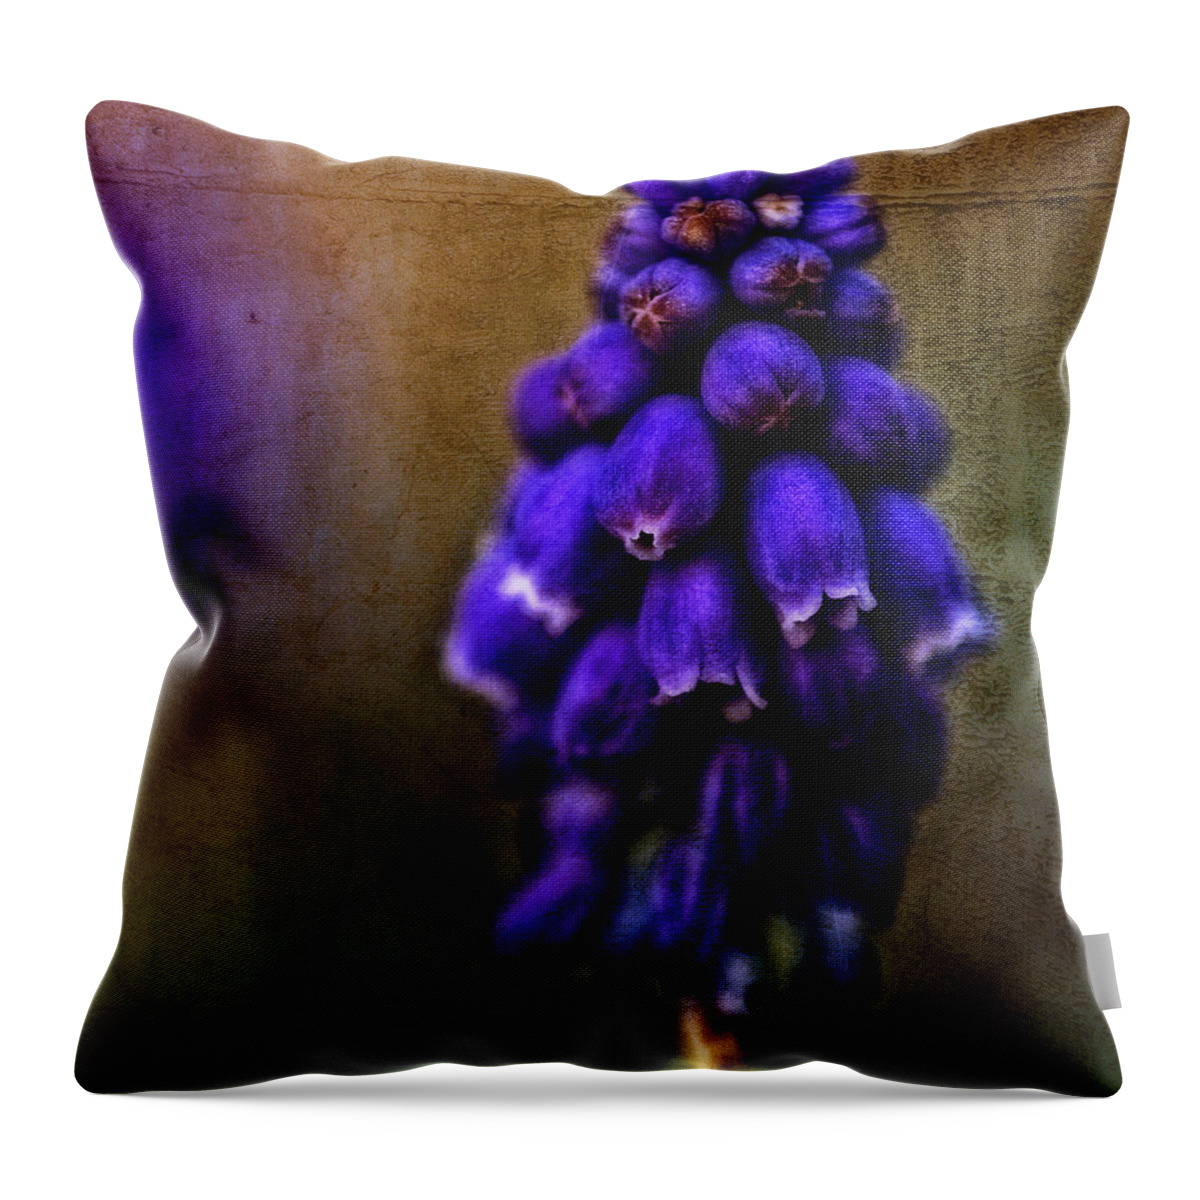 Hyacinth Throw Pillow featuring the photograph Grape Hyacinth - Textured by Mark Alder